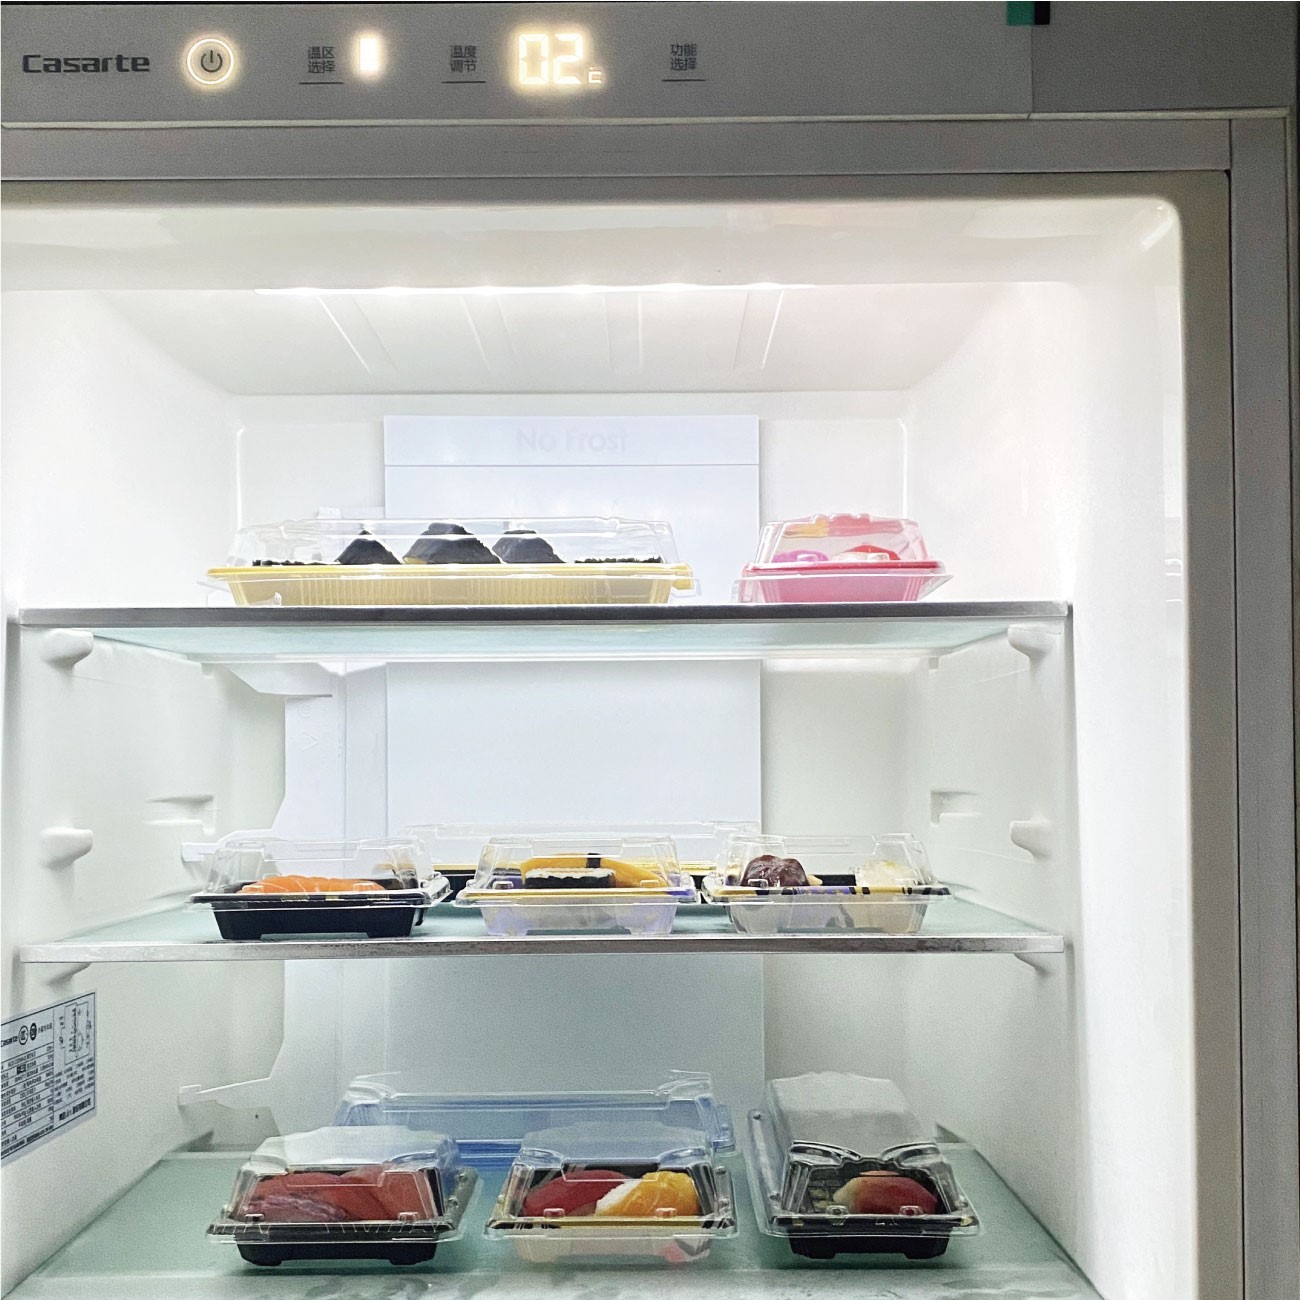 There are some sushi plates WL-0.6 in the refrigerator, which can be used for refrigeration.